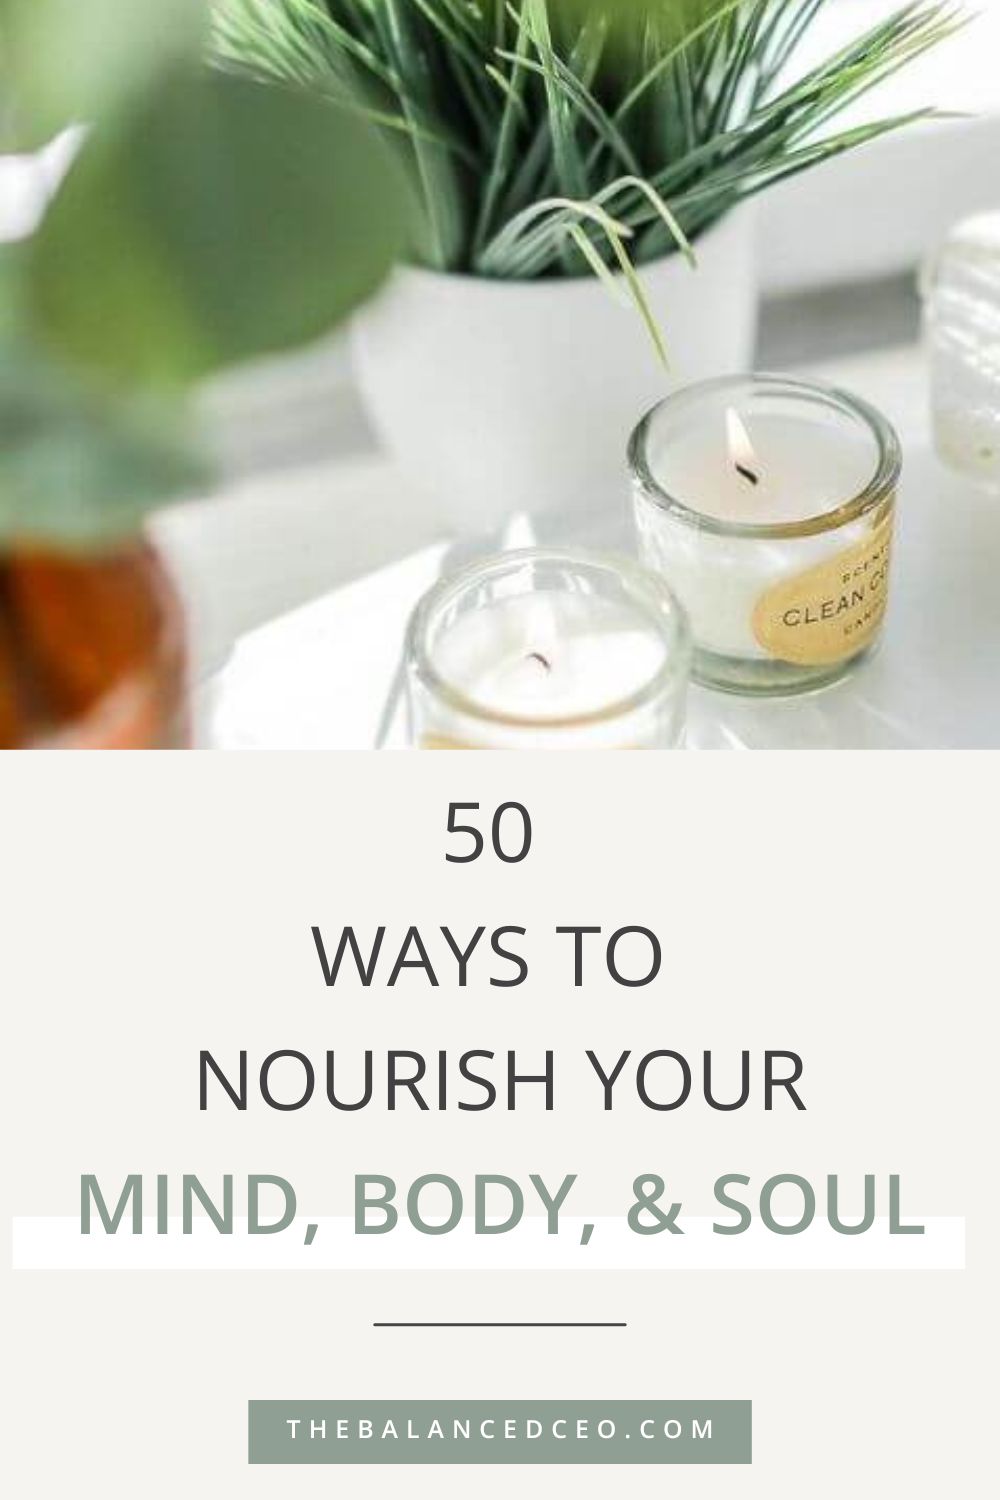 50 Ways to Nourish Your Mind, Body, and Soul